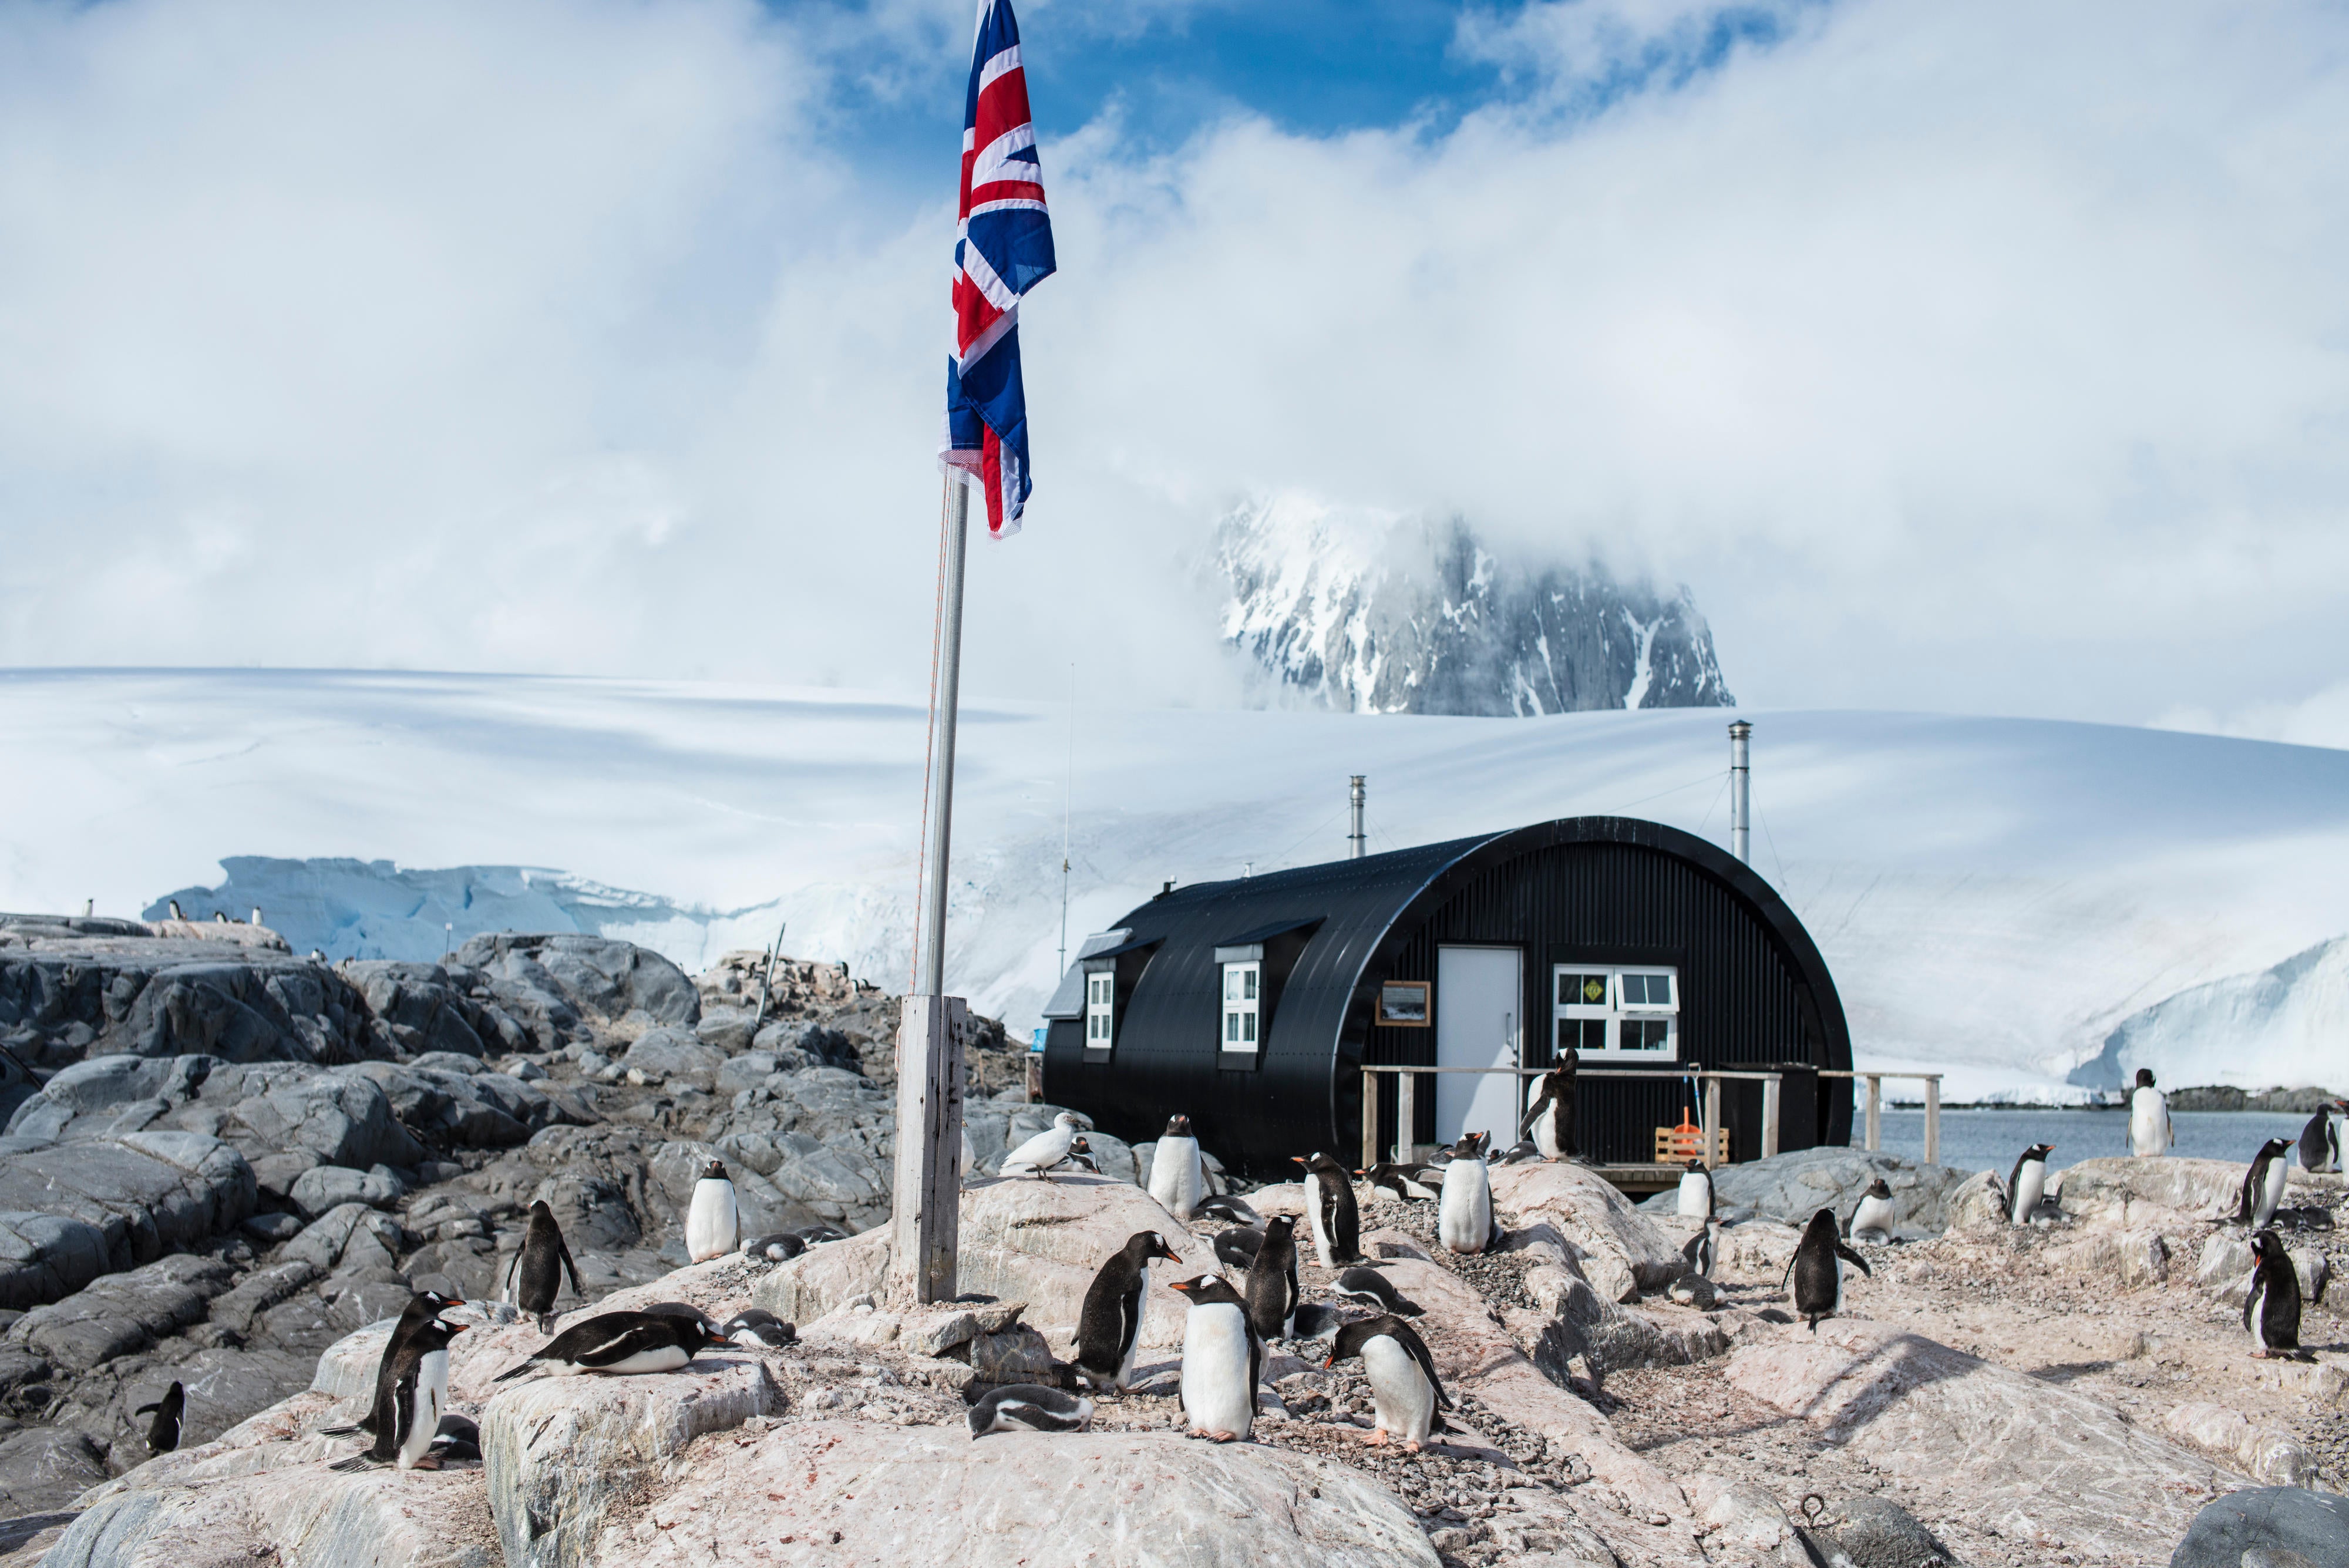 Staff wanted to watch penguins and run gift shop in Antarctica | The  Independent